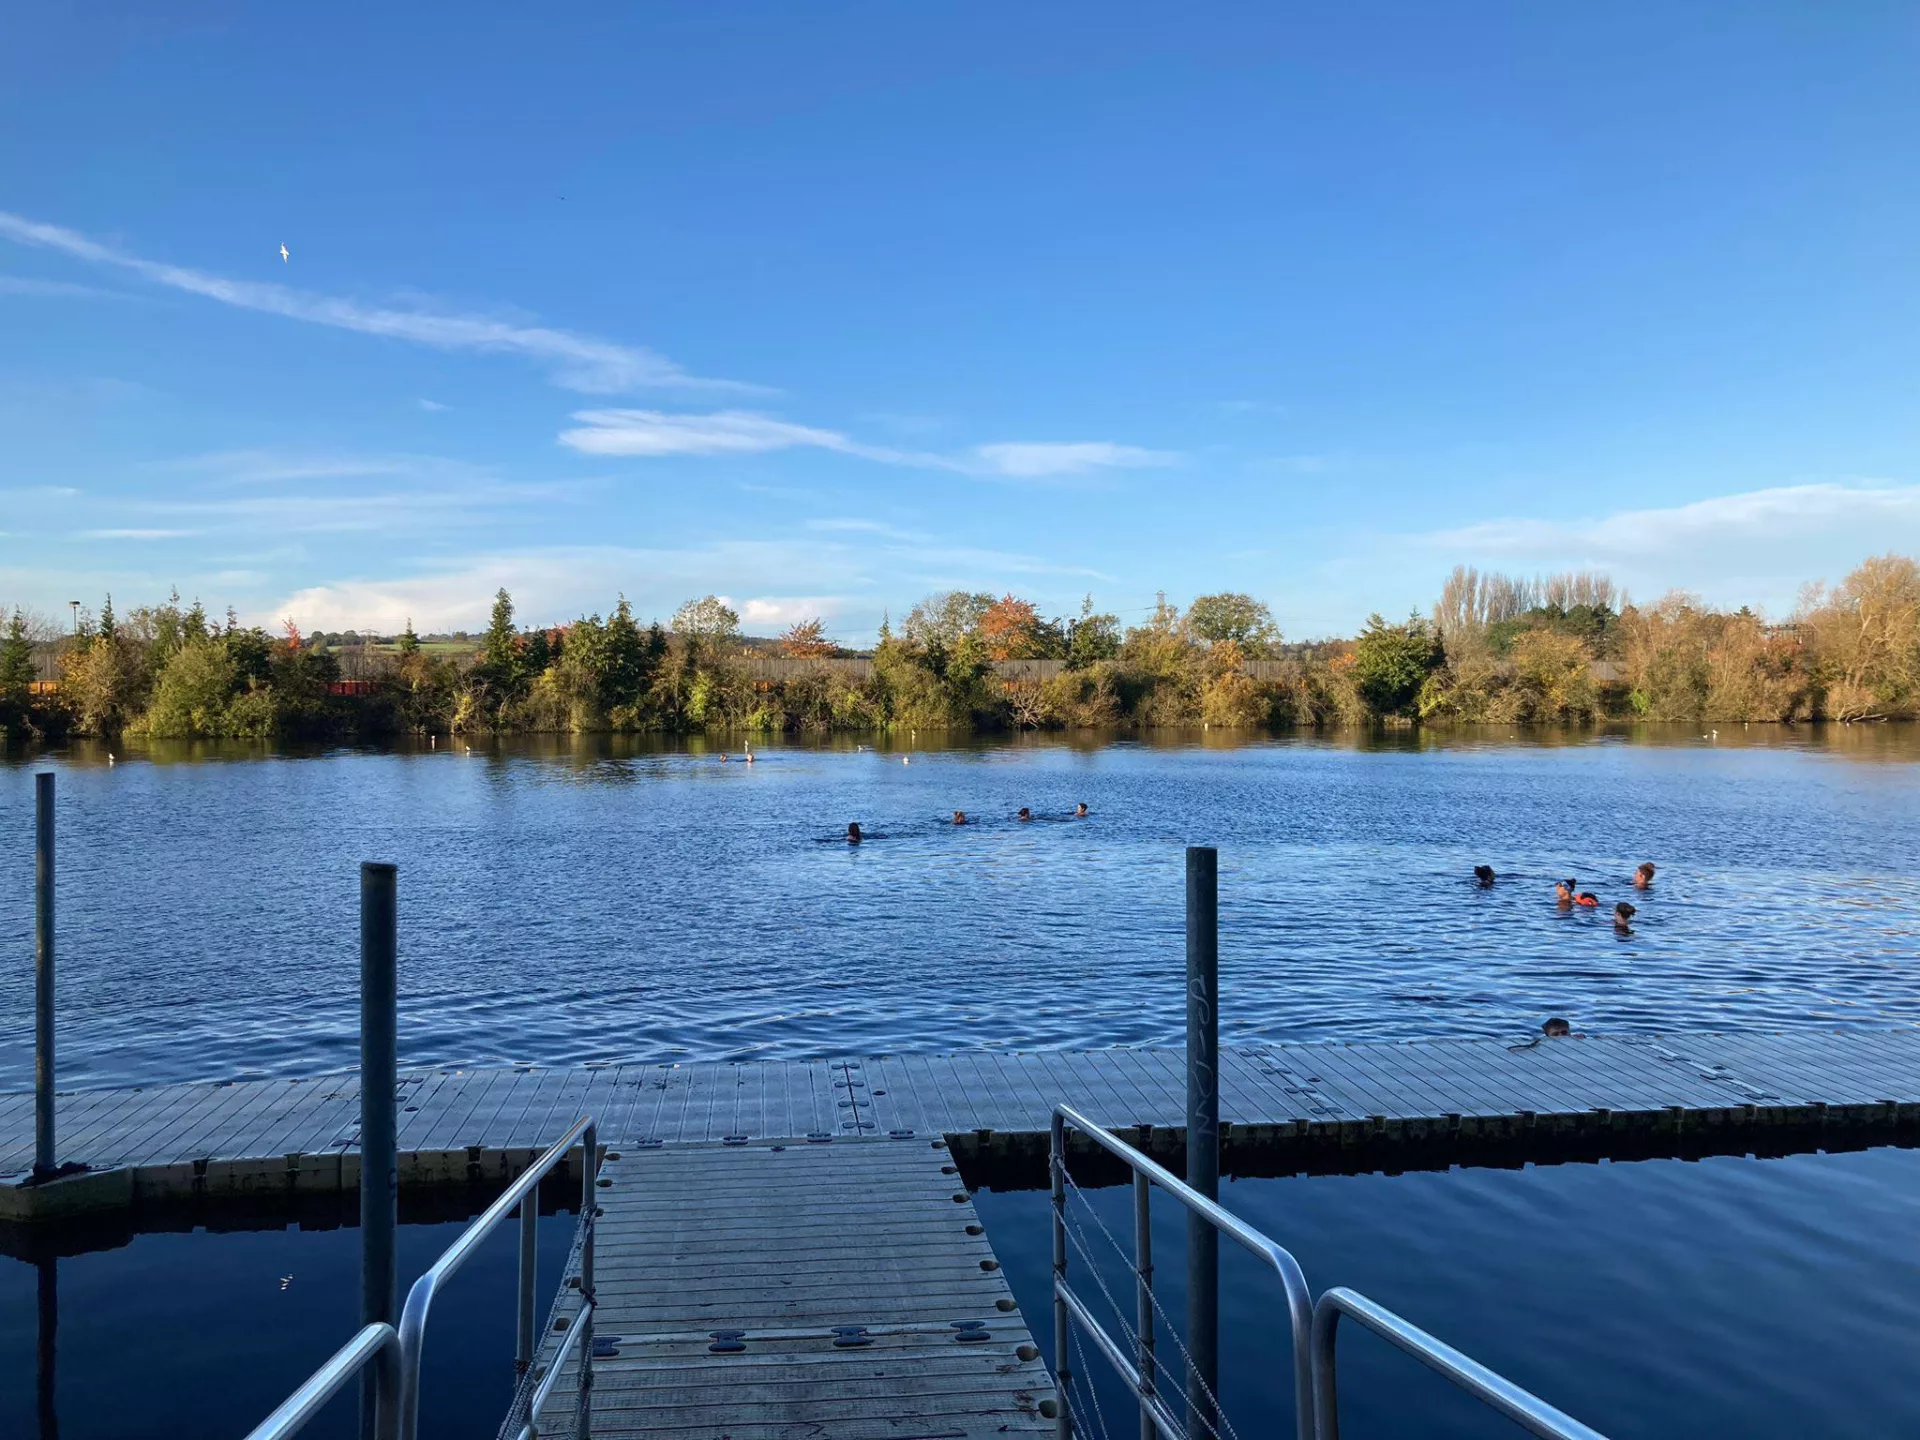 Hinksey lake looking tranquil and blue with a few swimmers and a jetty in the foreground.